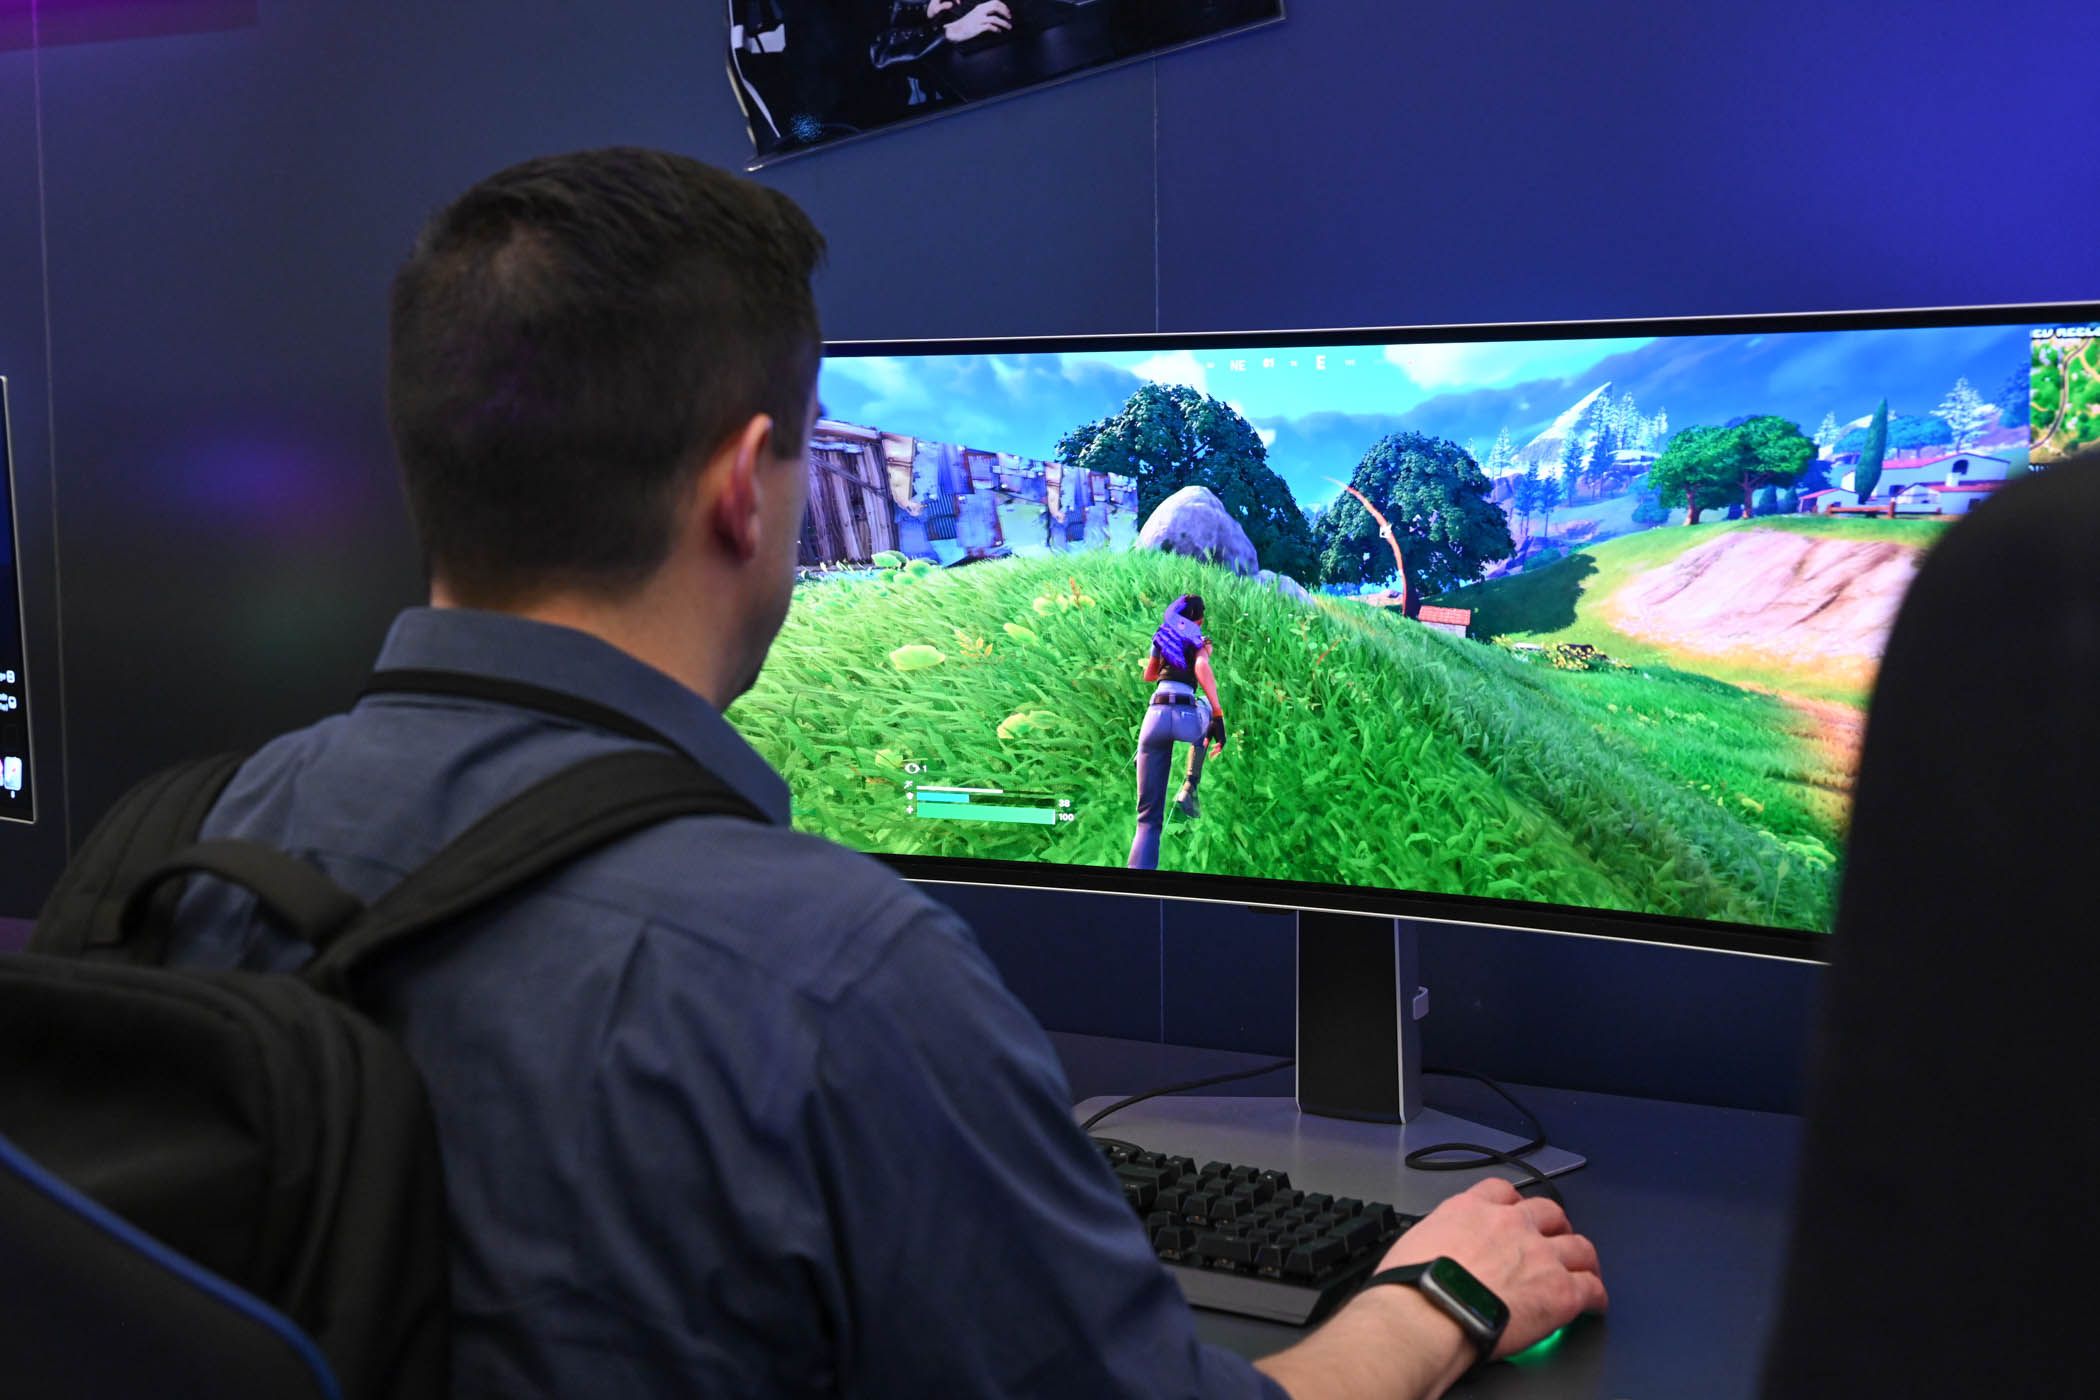 Samsung Expands Odyssey Gaming Monitor Lineup With New OLED Models at CES  2024 - Samsung US Newsroom